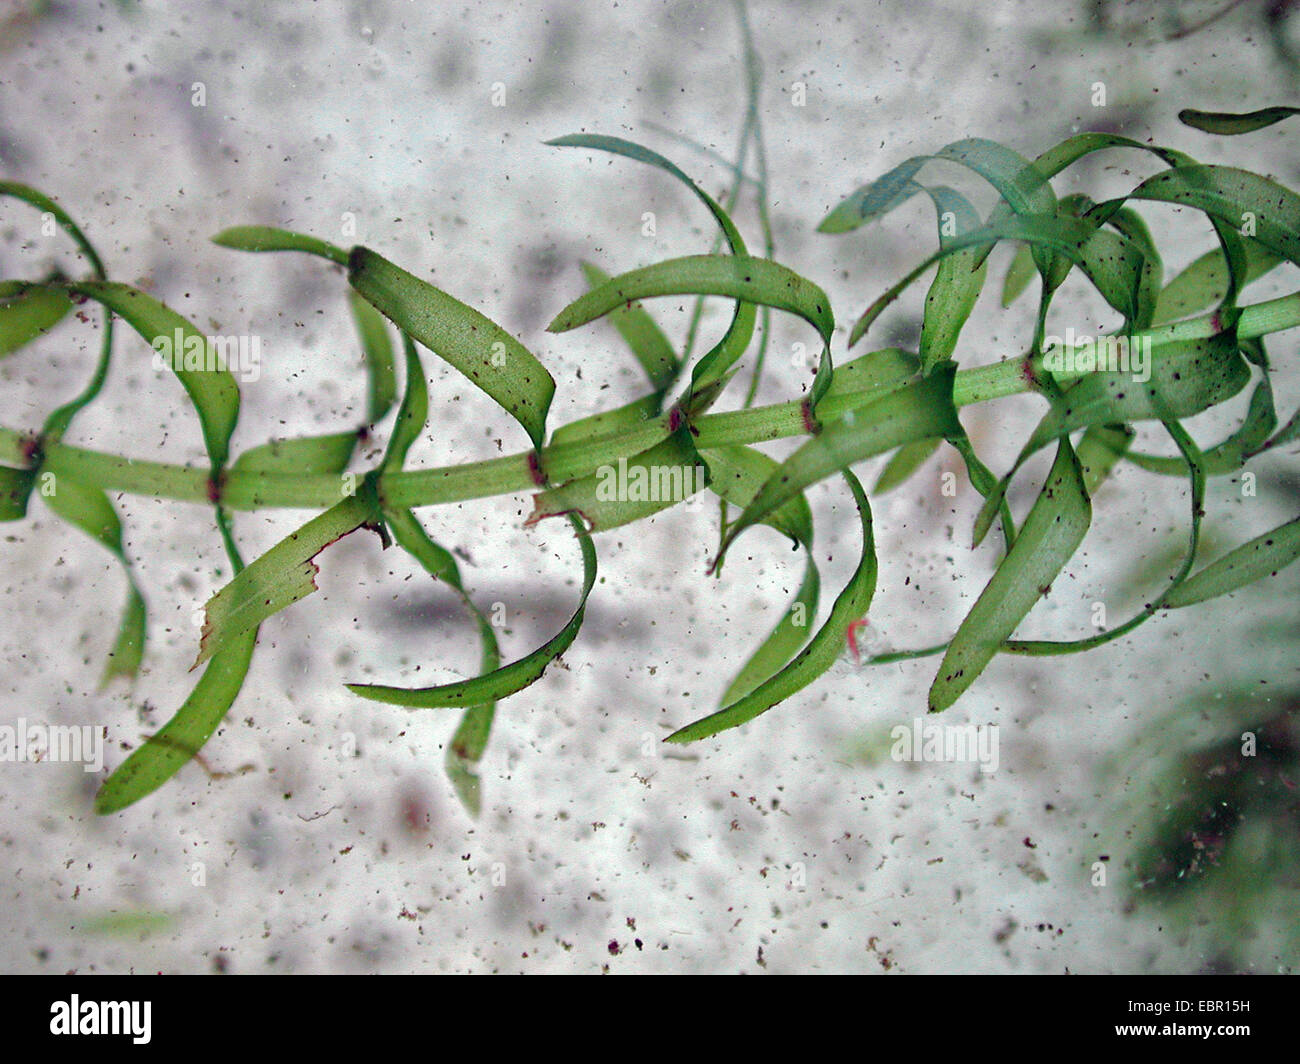 Nuttall waterweed, Western waterweed (Elodea nuttallii), sprout, Germany Stock Photo